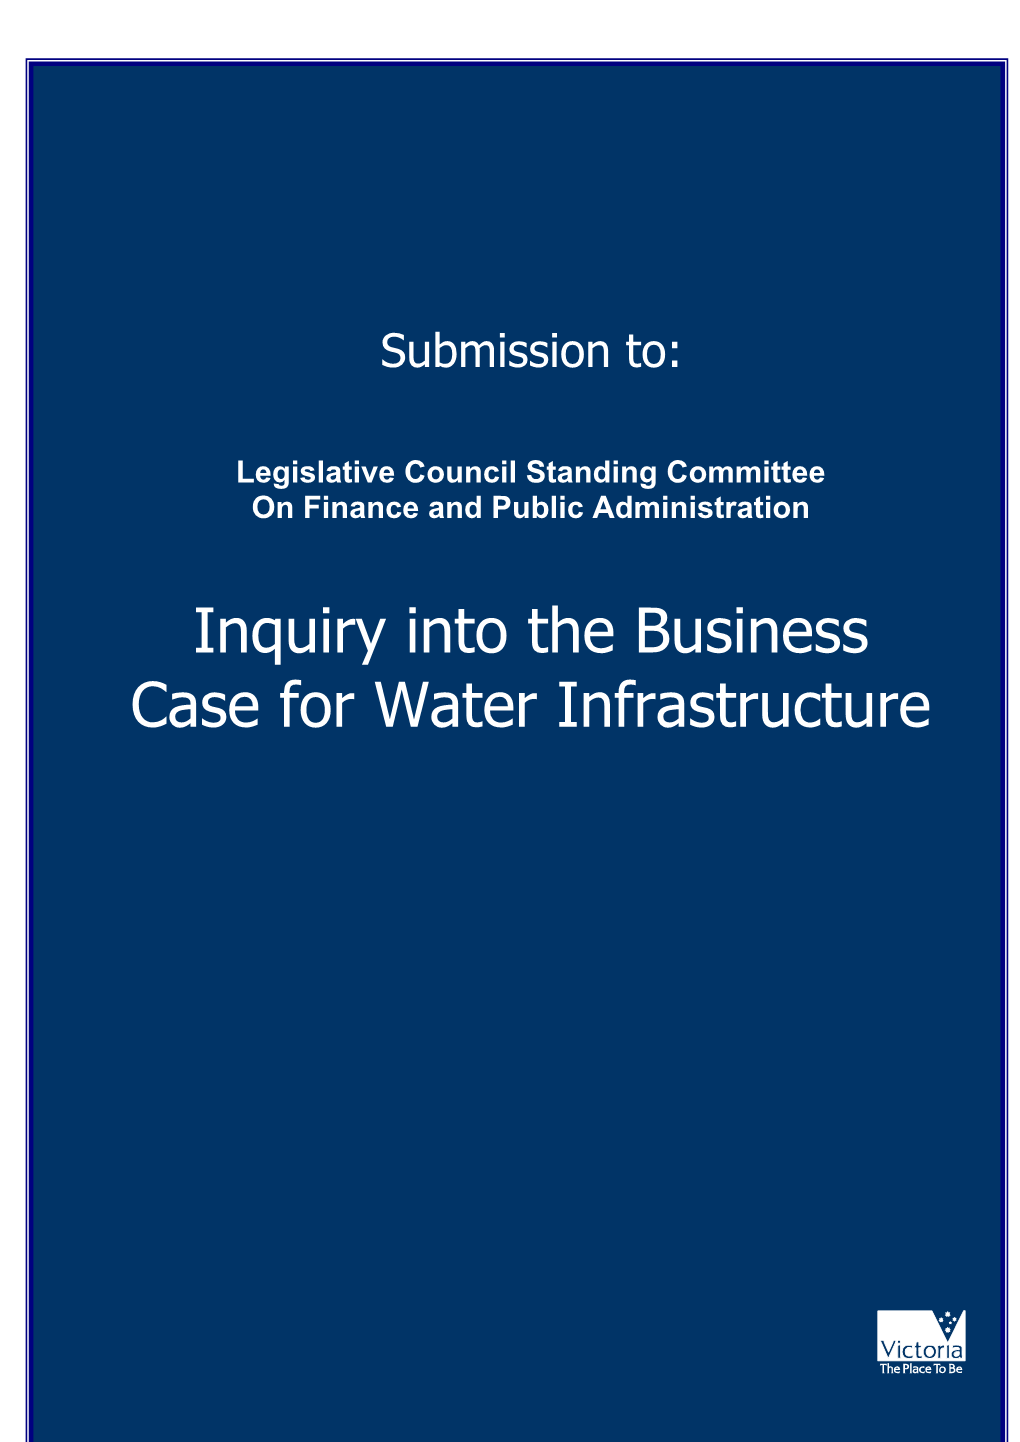 Inquiry Into the Business Case for Water Infrastructure